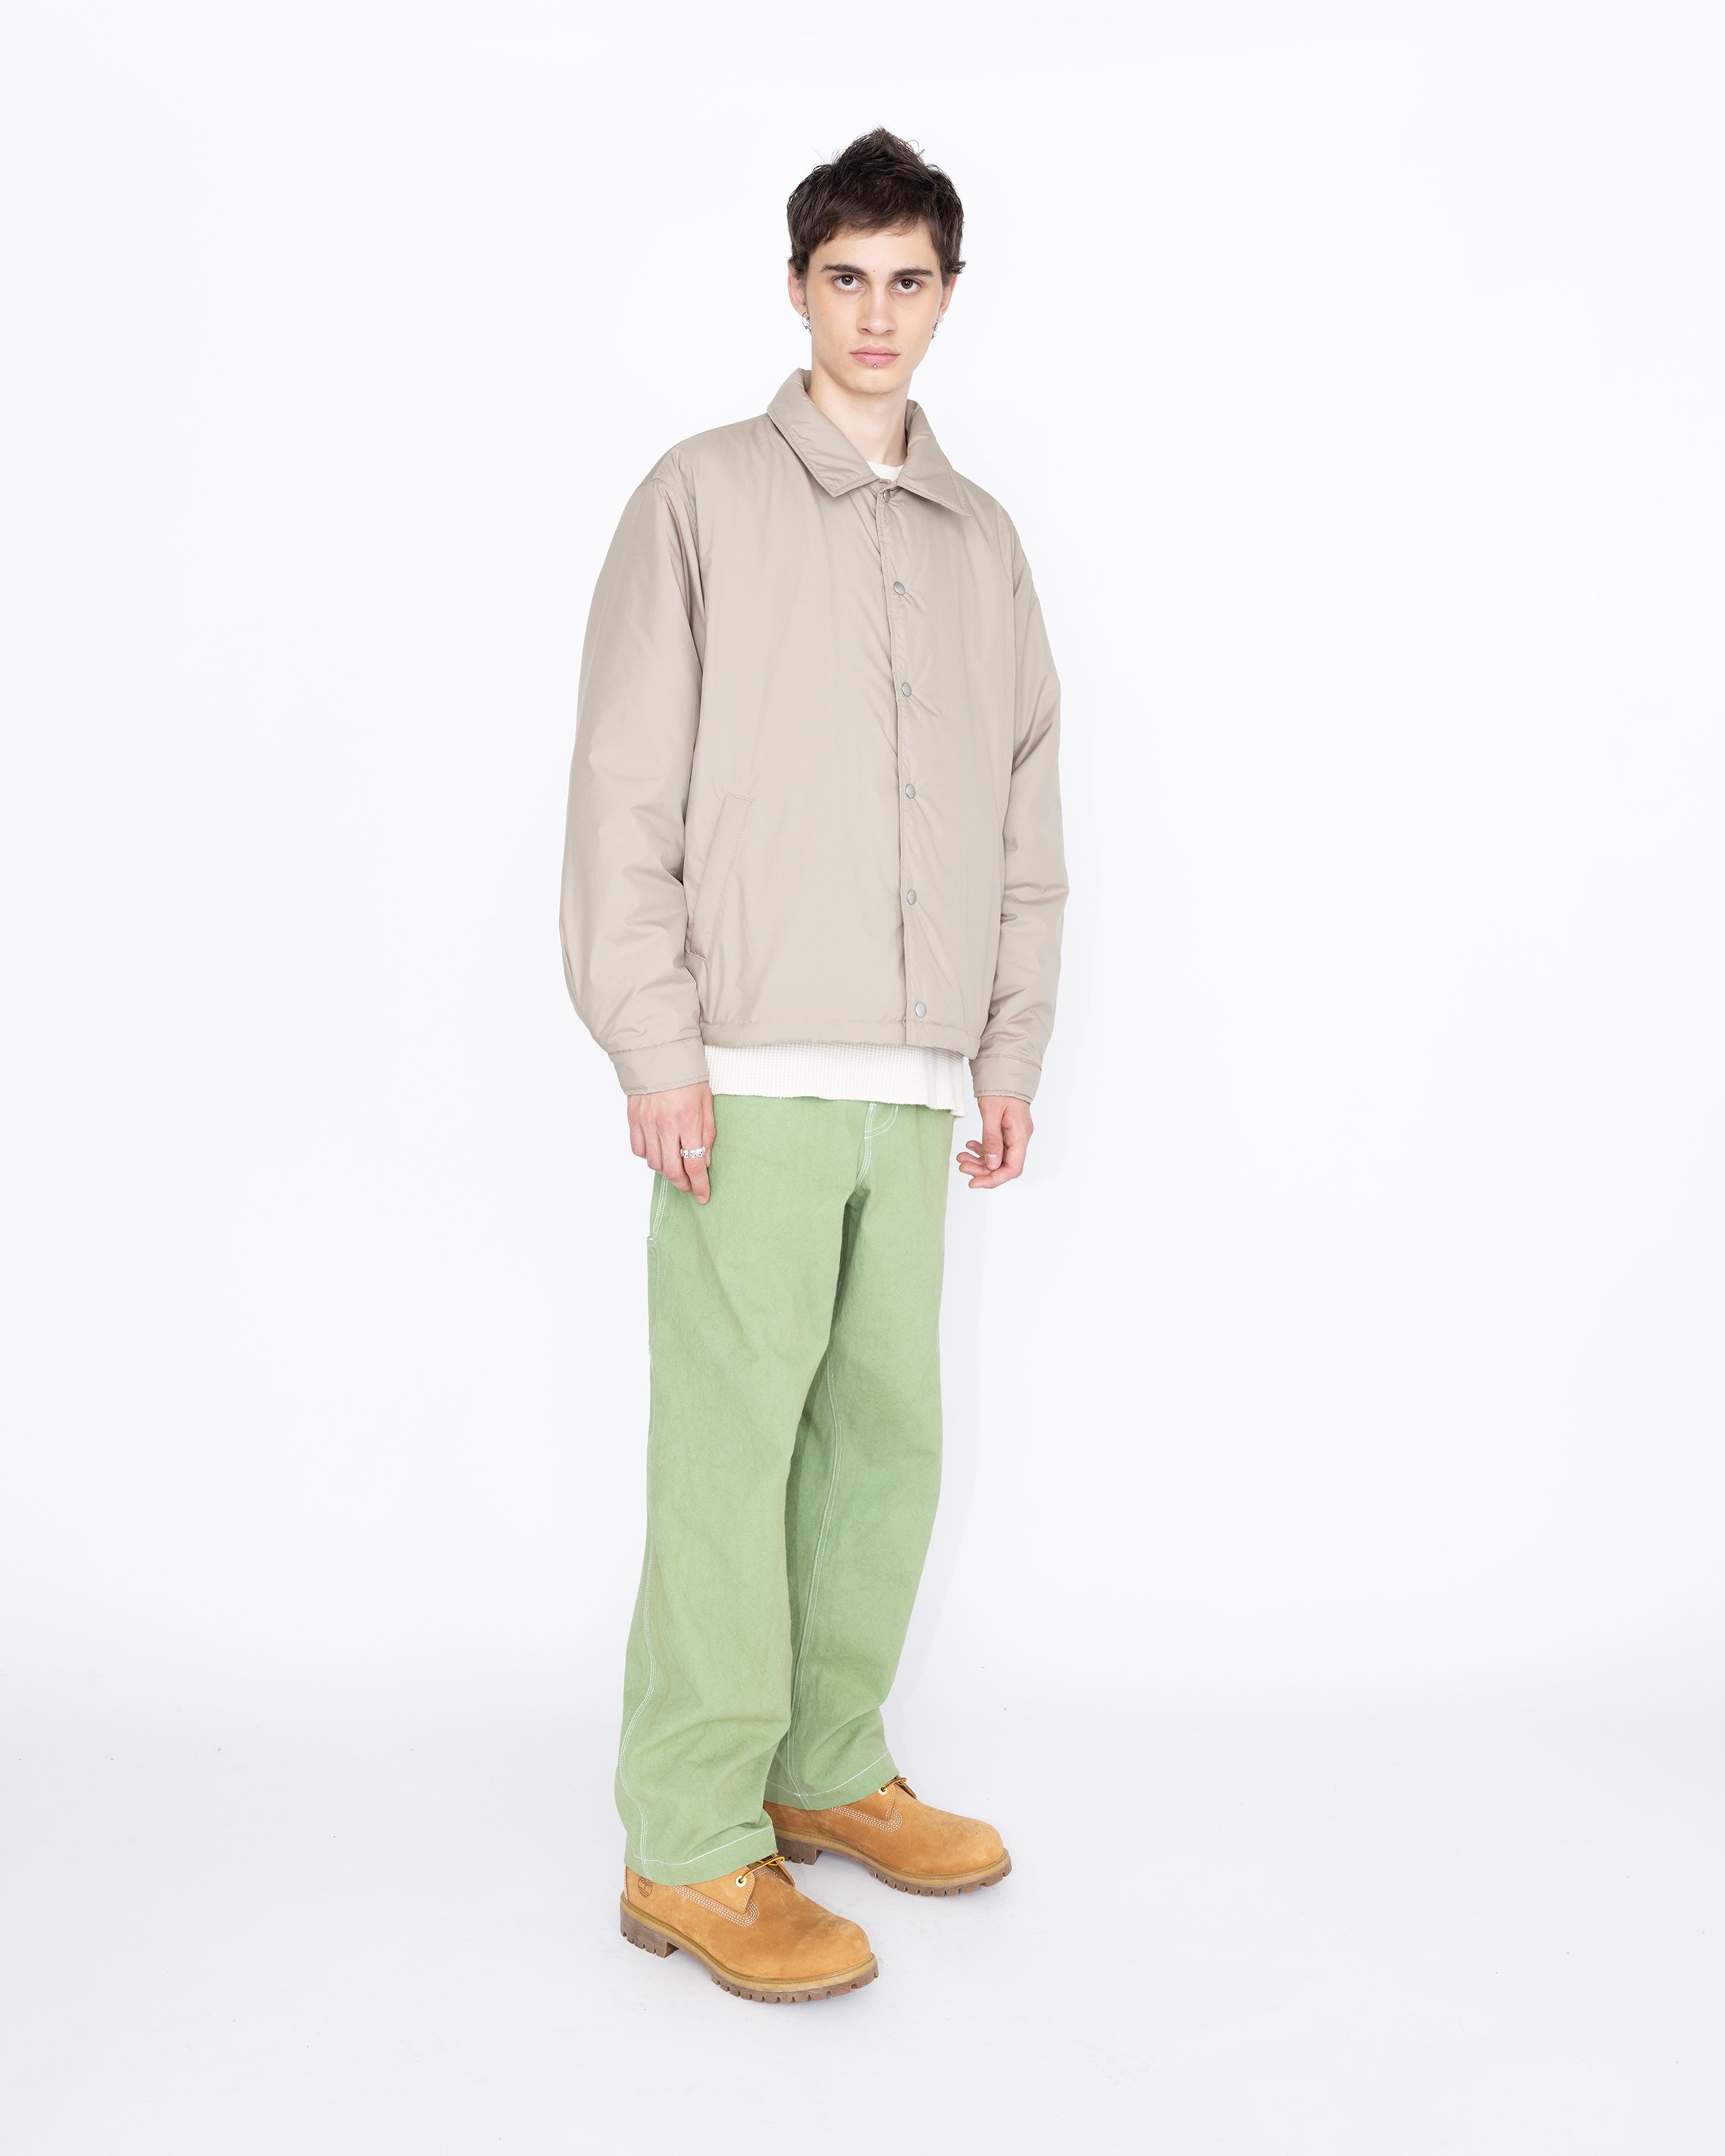 Highsnobiety HS05 – Light Insulated Eco-Poly Jacket Beige - Outerwear - Beige - Image 4